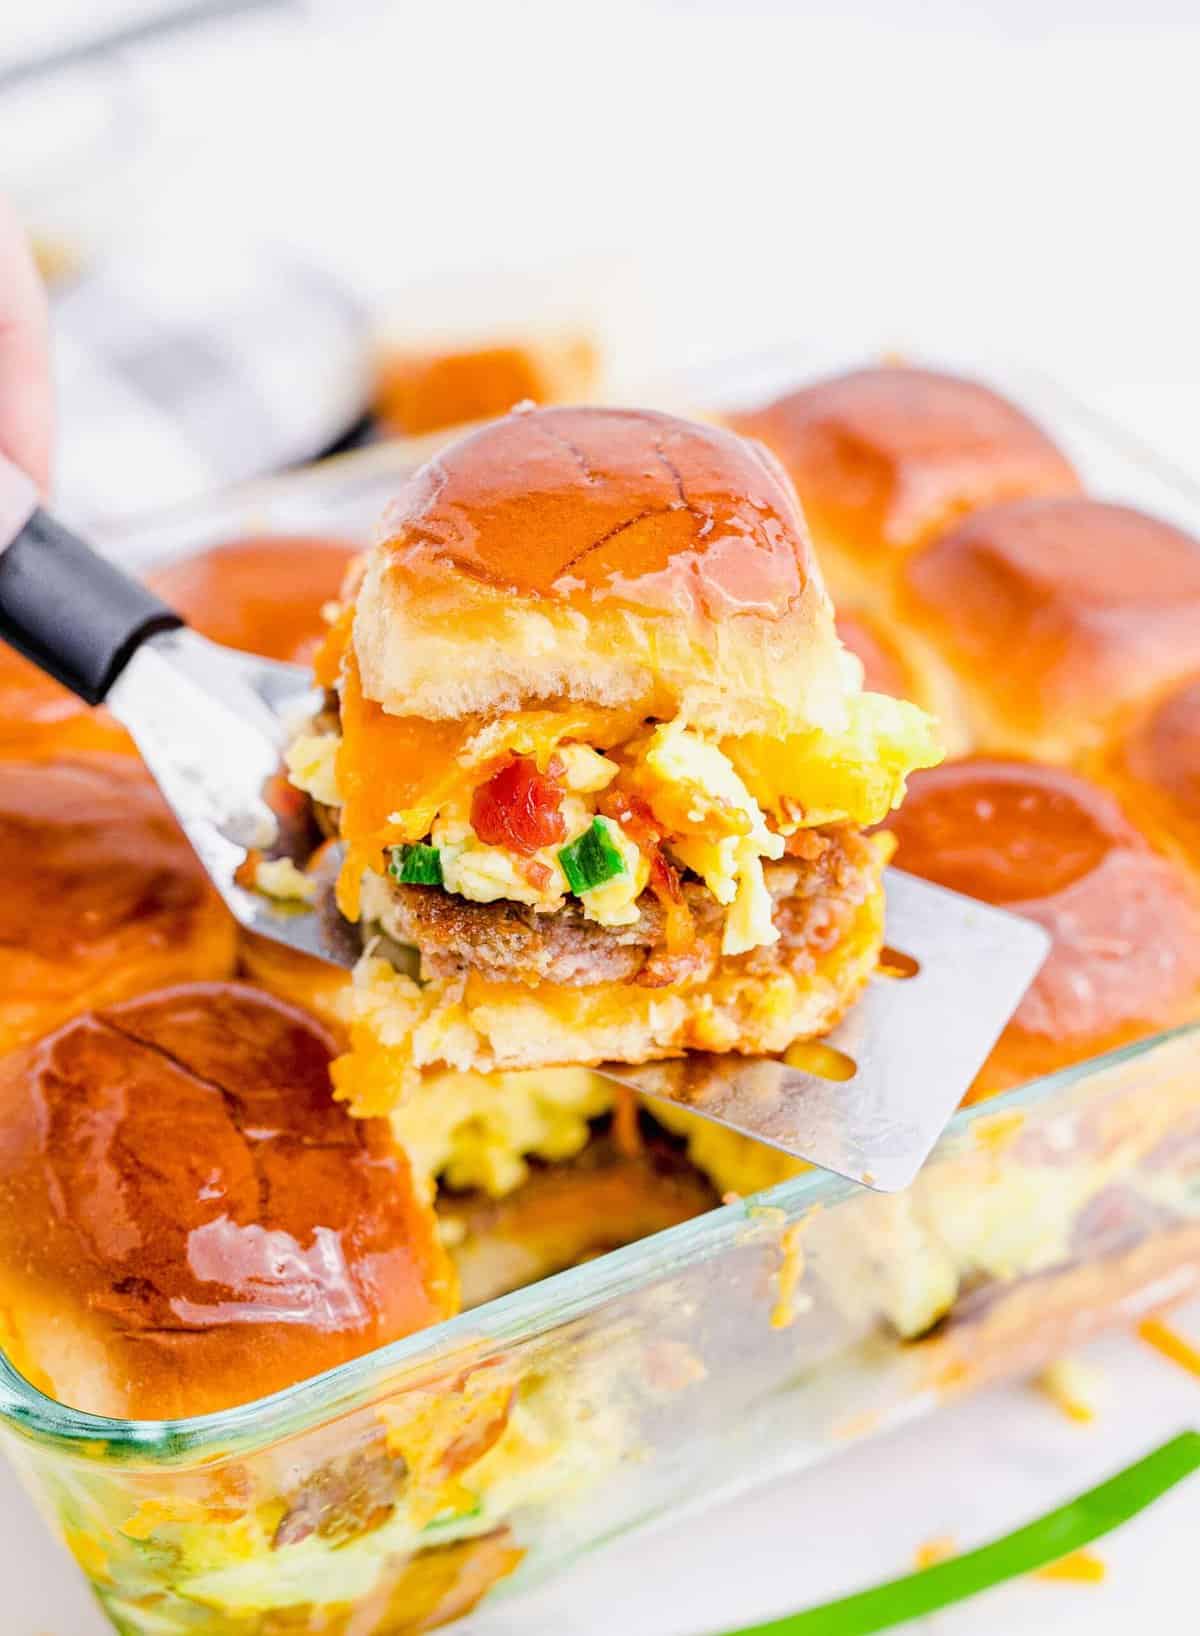 Cheesy Bacon Sausage Breakfast Sliders With Eggs | Table for Two